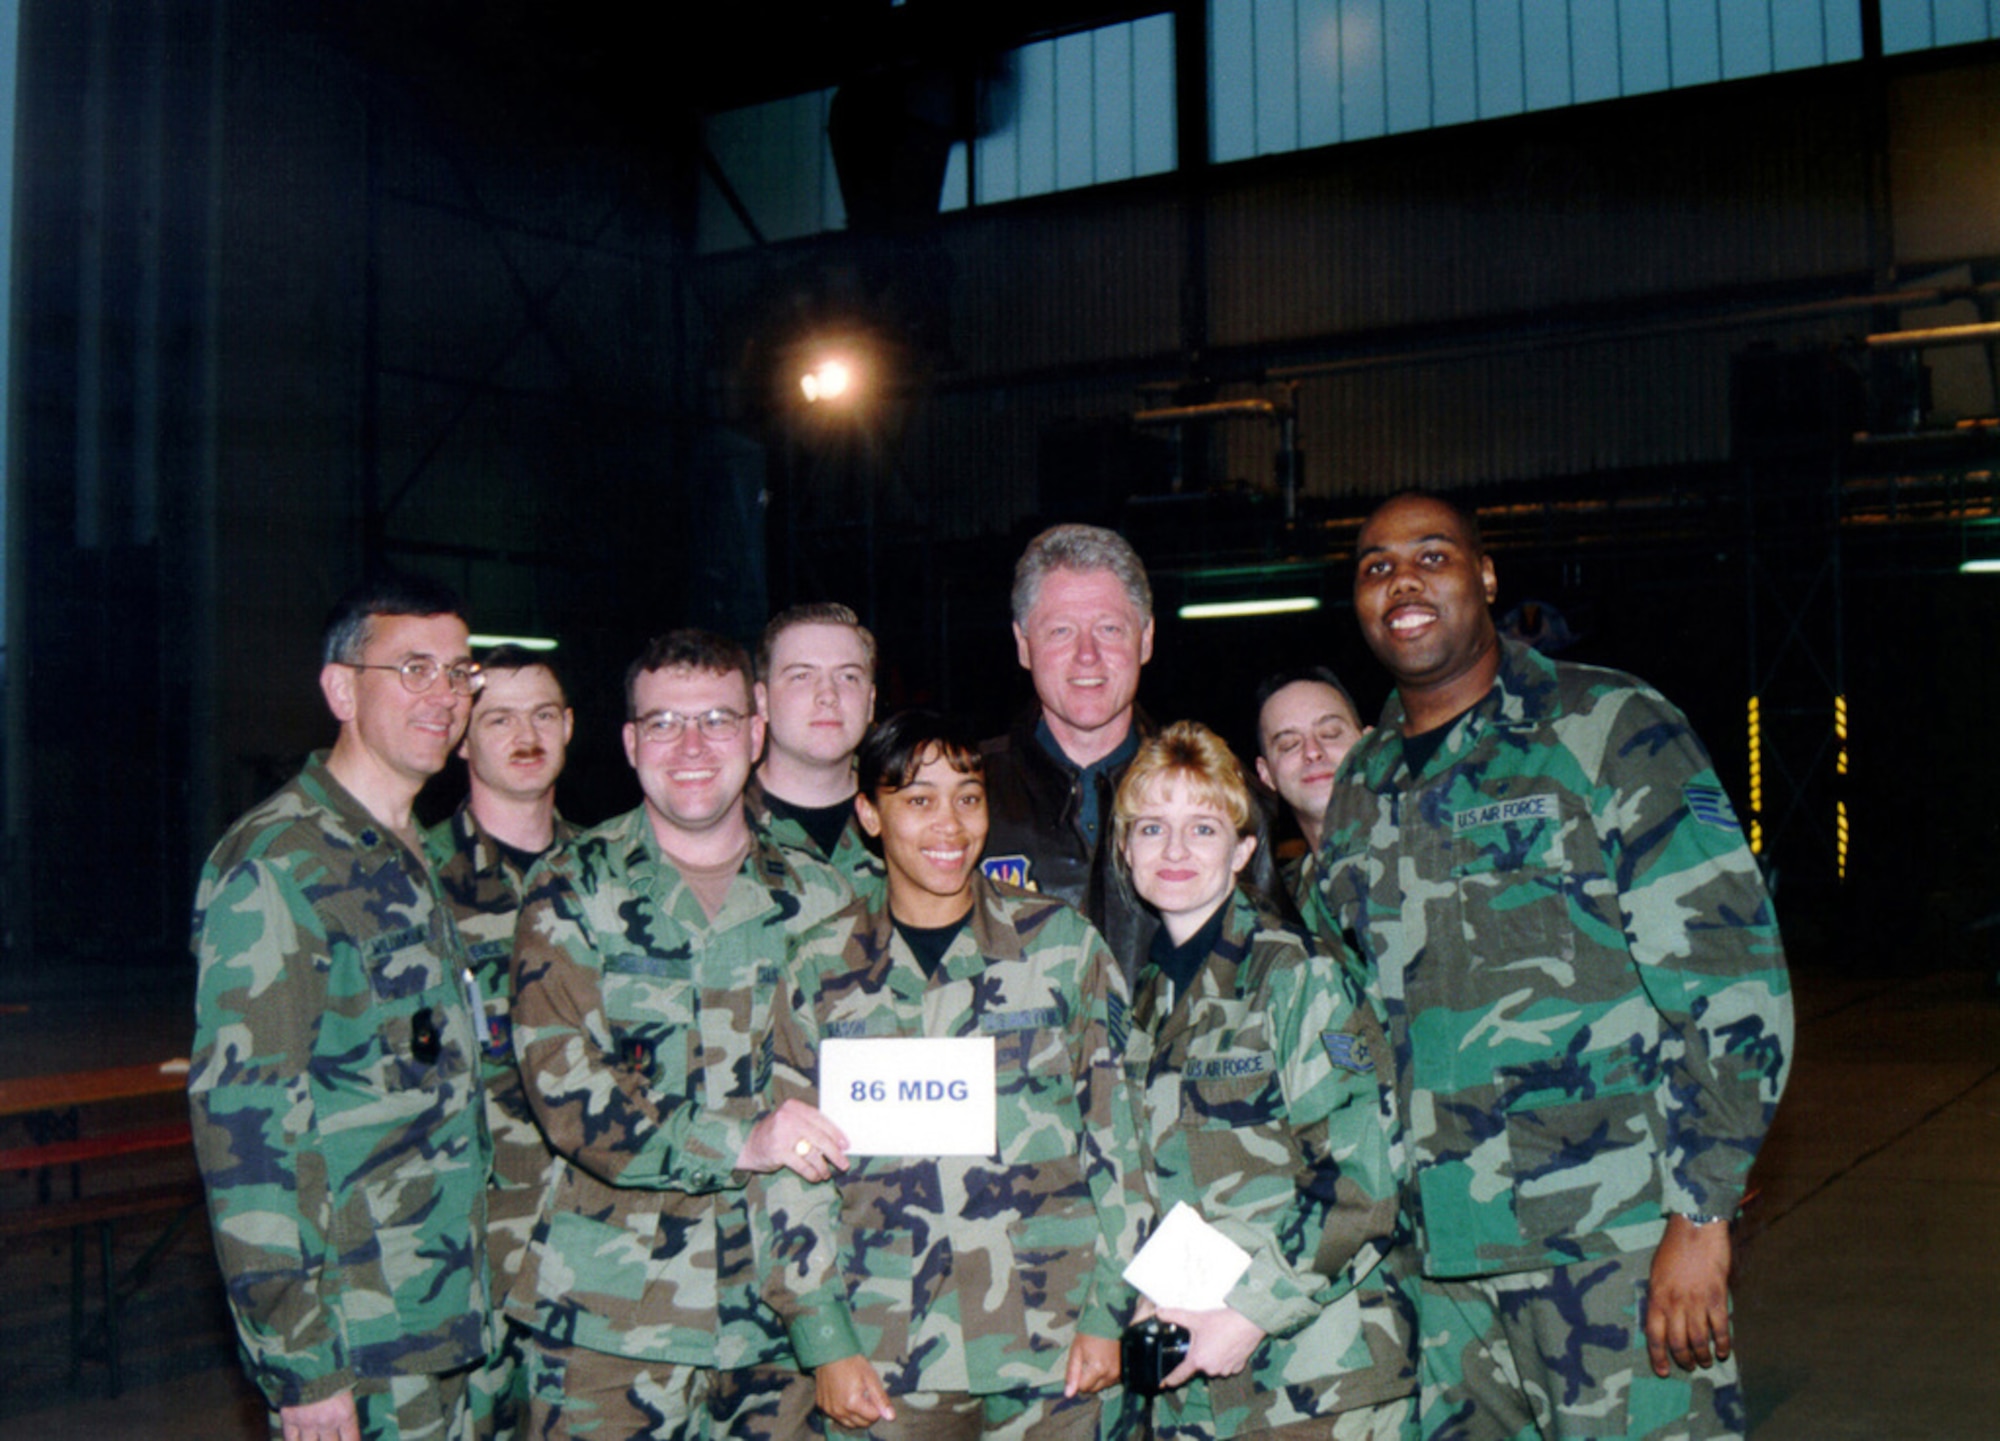 Former President William Jefferson Clinton poses for a photo with a member of the 86th Medical Group, Ramstein Air Base, Germany, during a dinner held at the base, on May 5, 1999. The former President visited Ramstein Air Base to thank the troops for their support of Operations Allied force and Sustain Hope. (U.S. Air Force photo by Senior Airman Brian Biosvert)